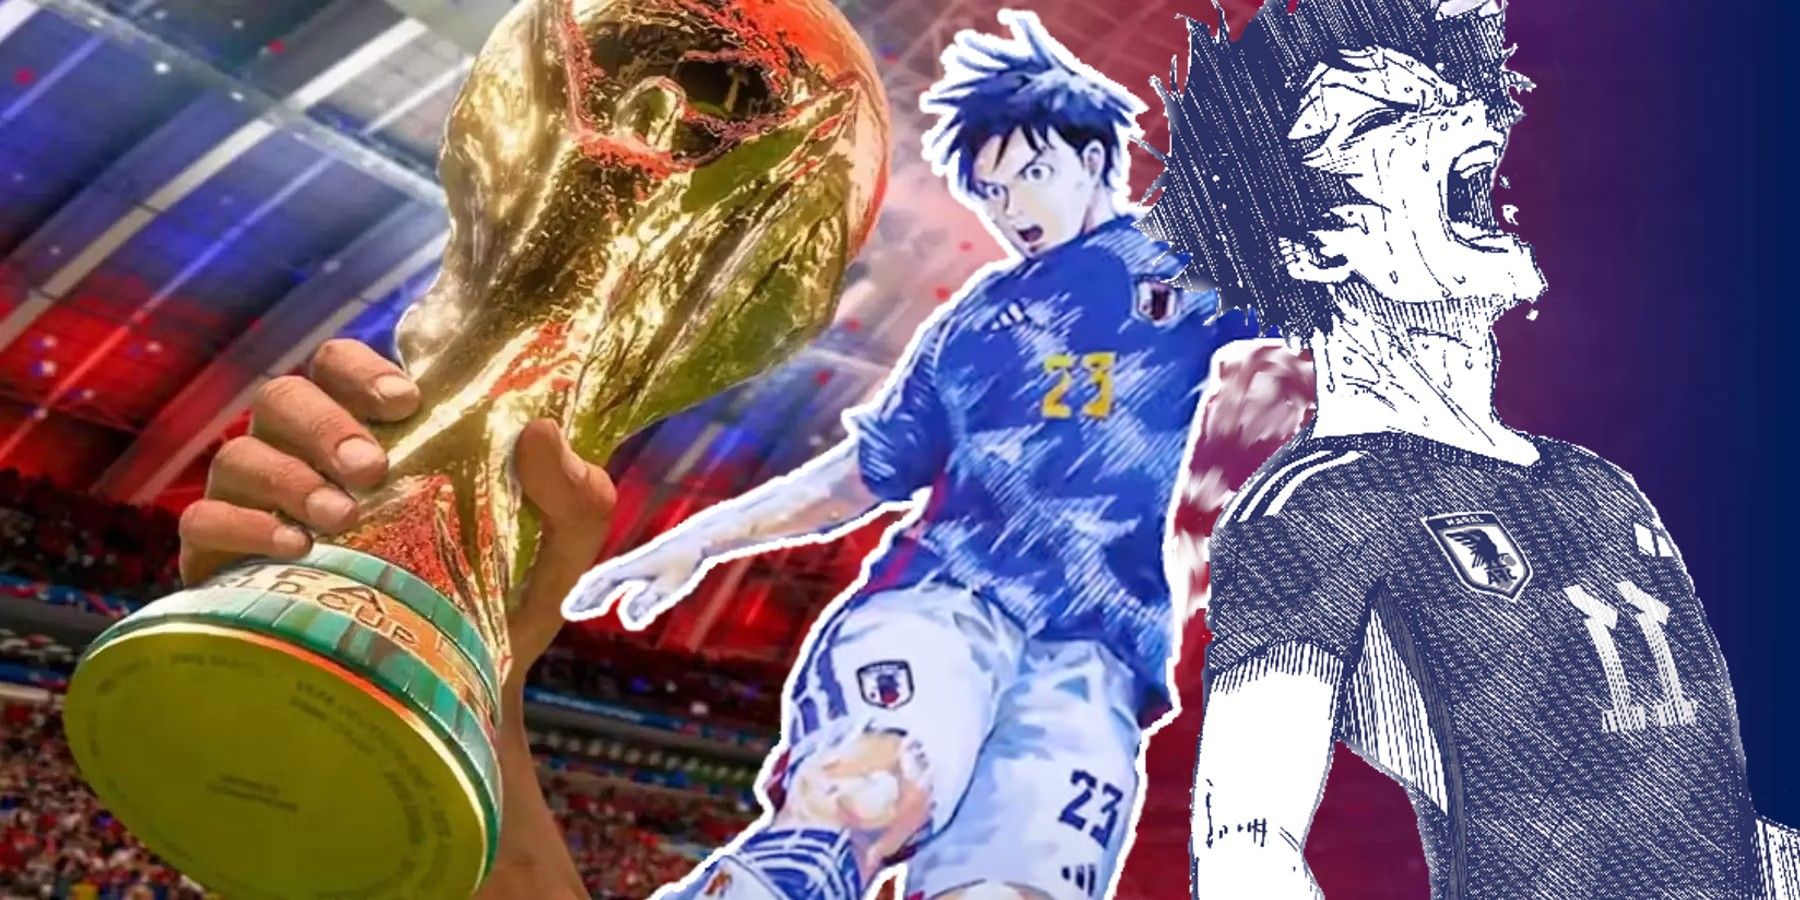 Blue Lock Anime Trailer Has Us Excited About The Soccer Meets Squid Game  Vibes